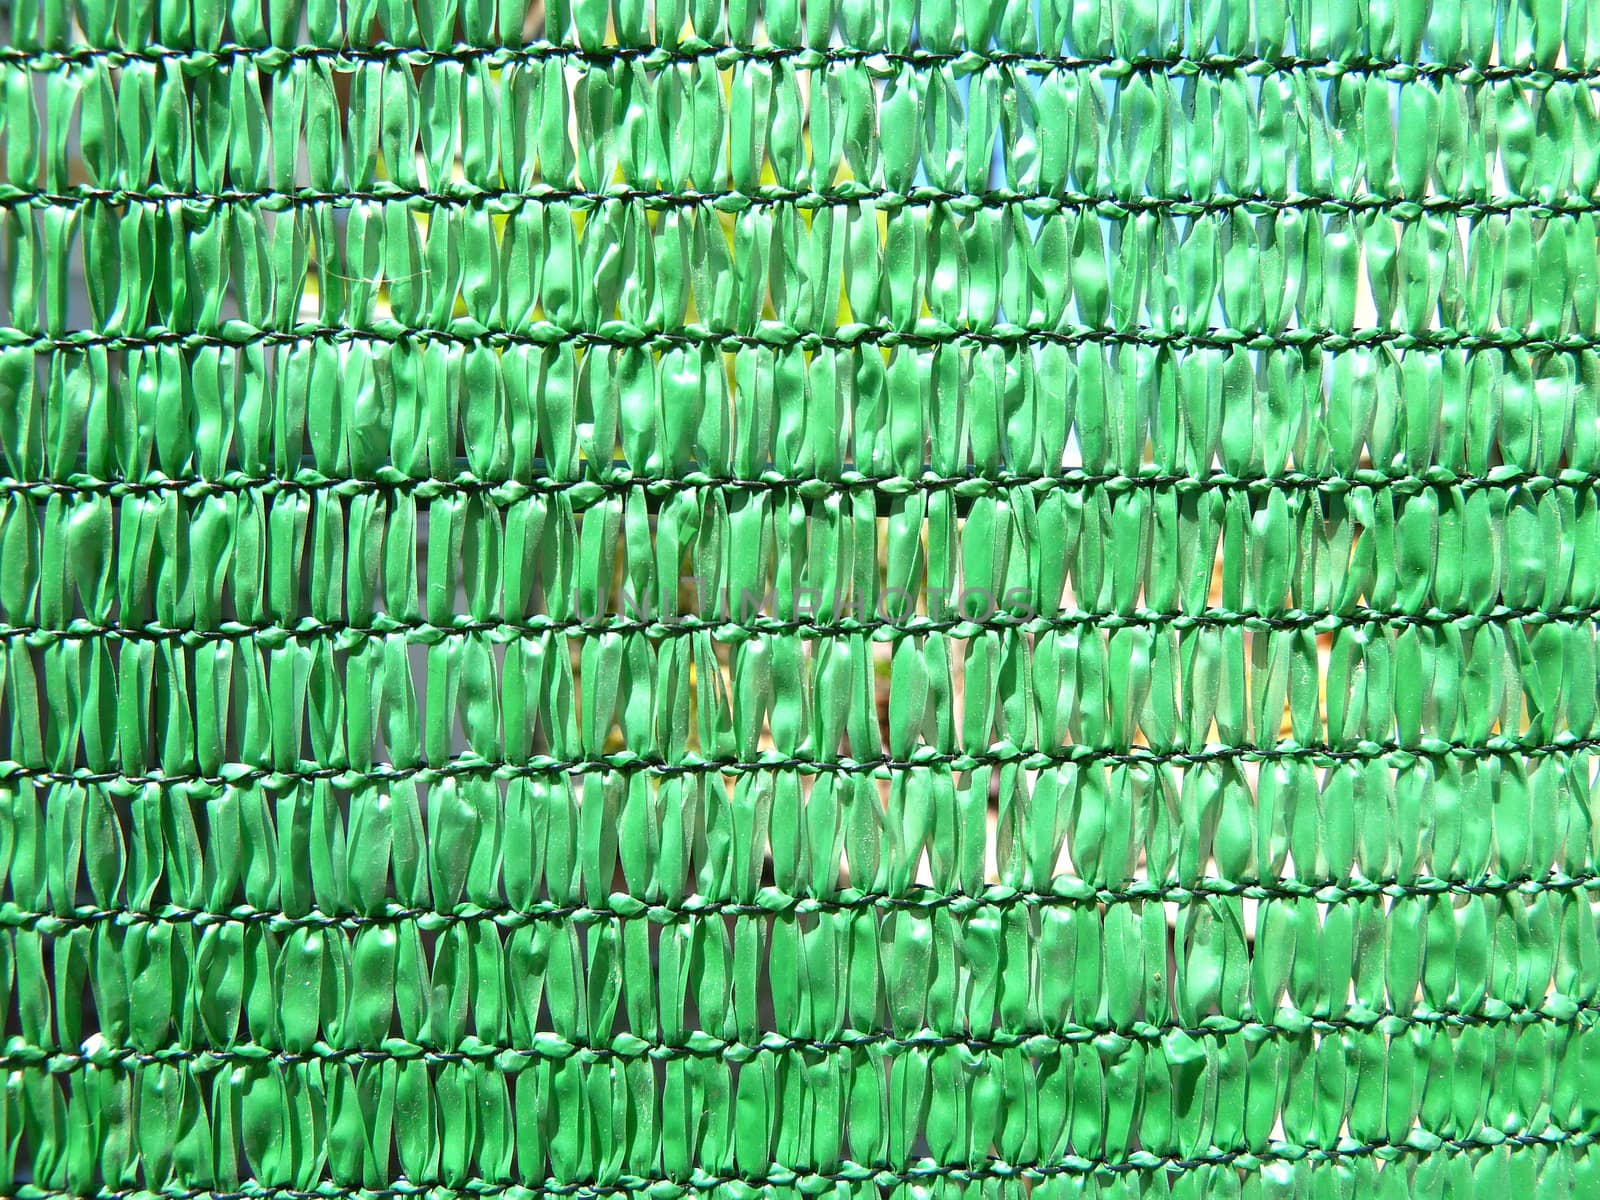 section of a bright green plastic screen